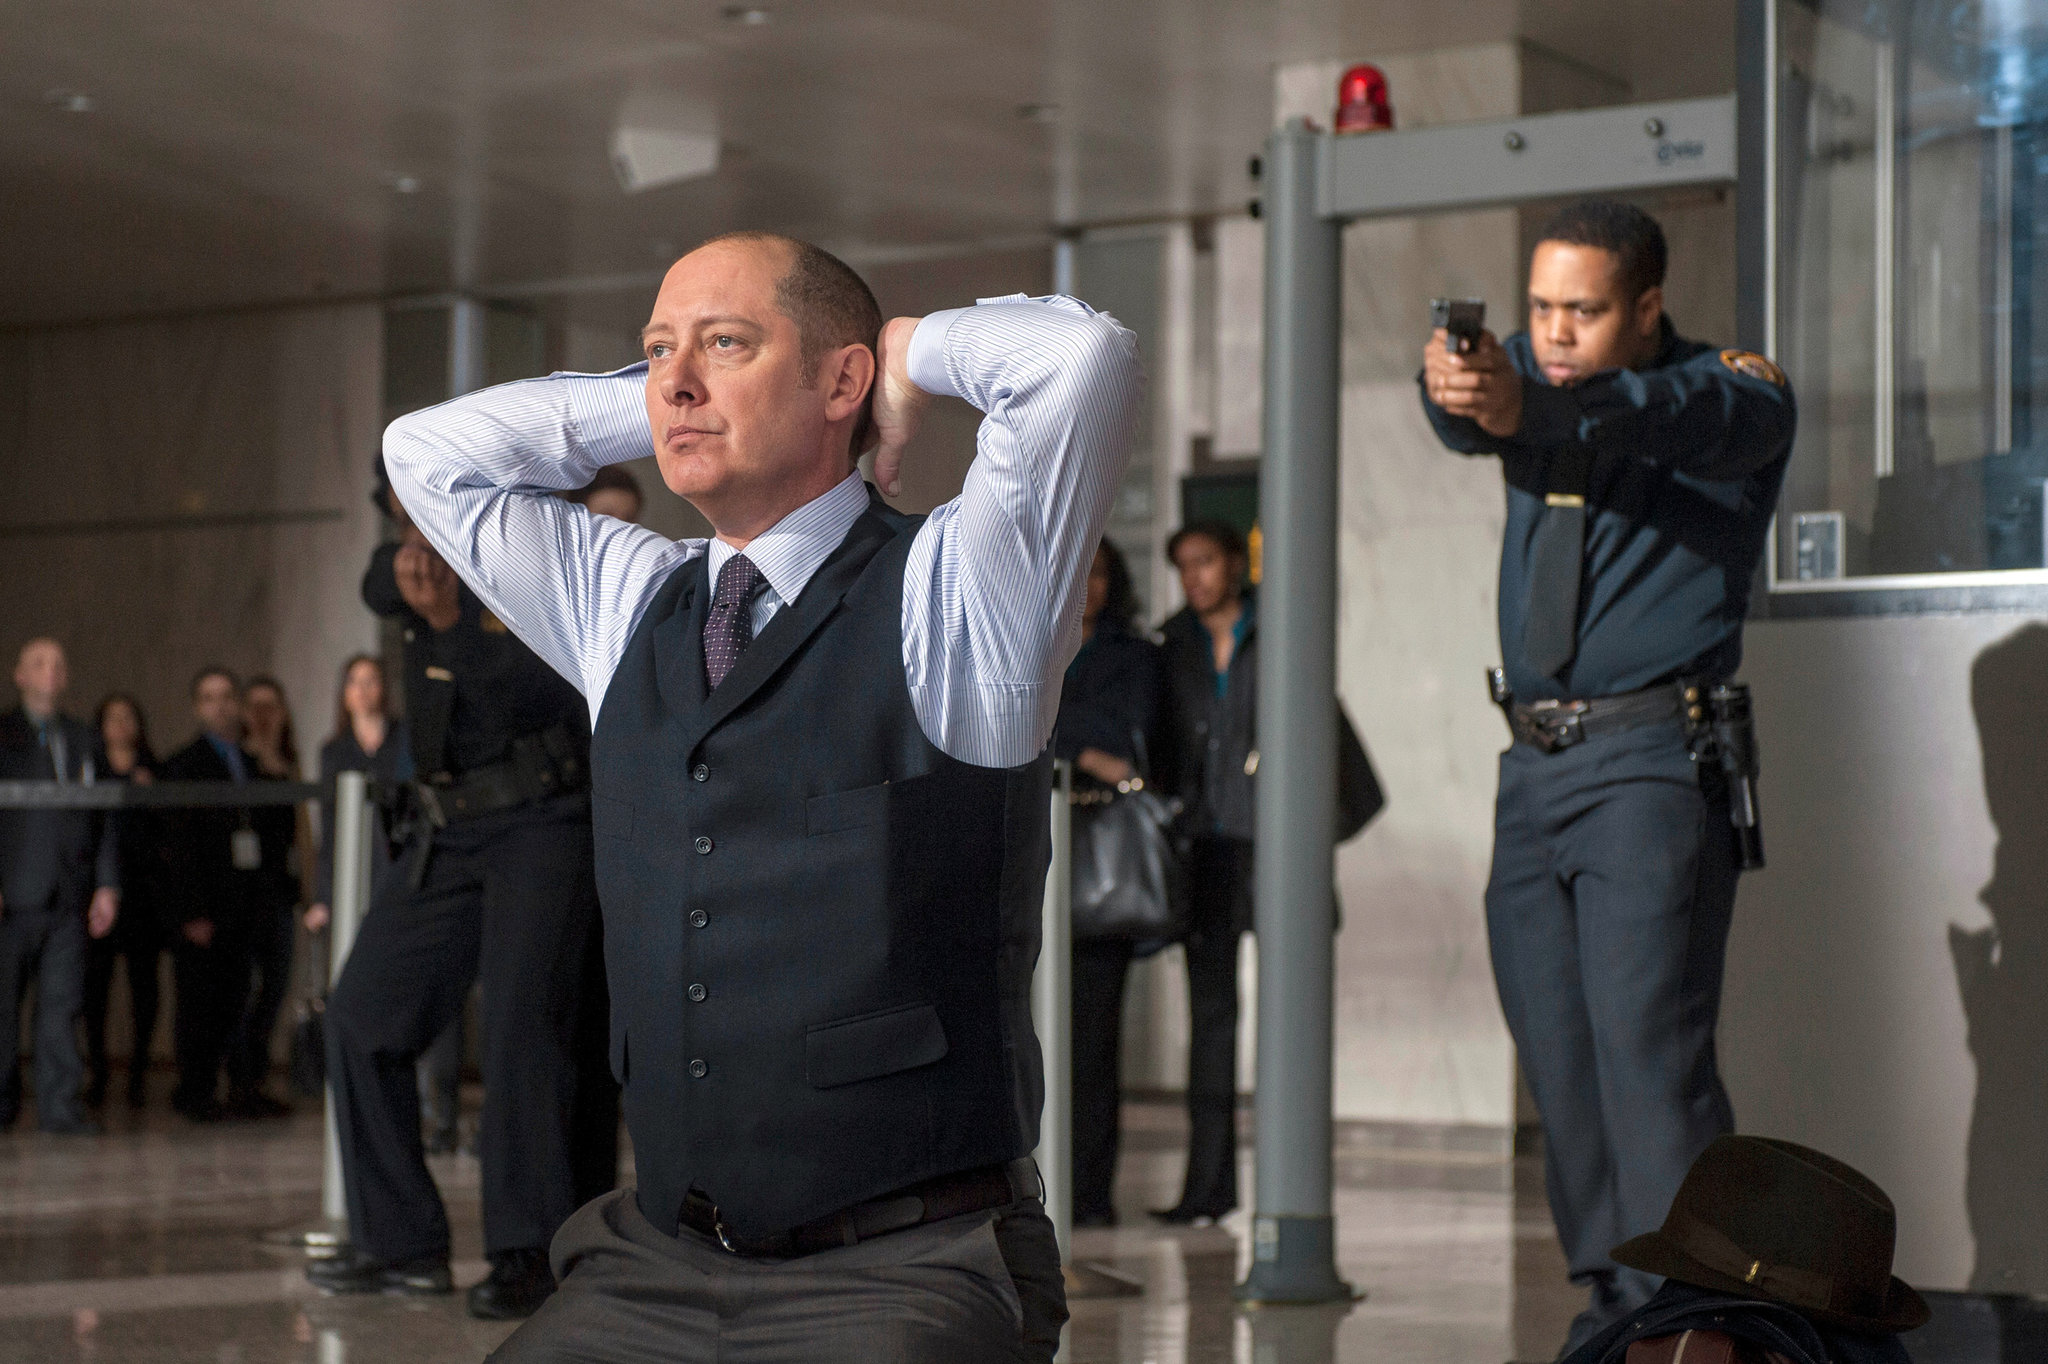 Is This the End for 'The Blacklist'? Fans Wonder About Season 11 as Netflix Wraps Up the Series